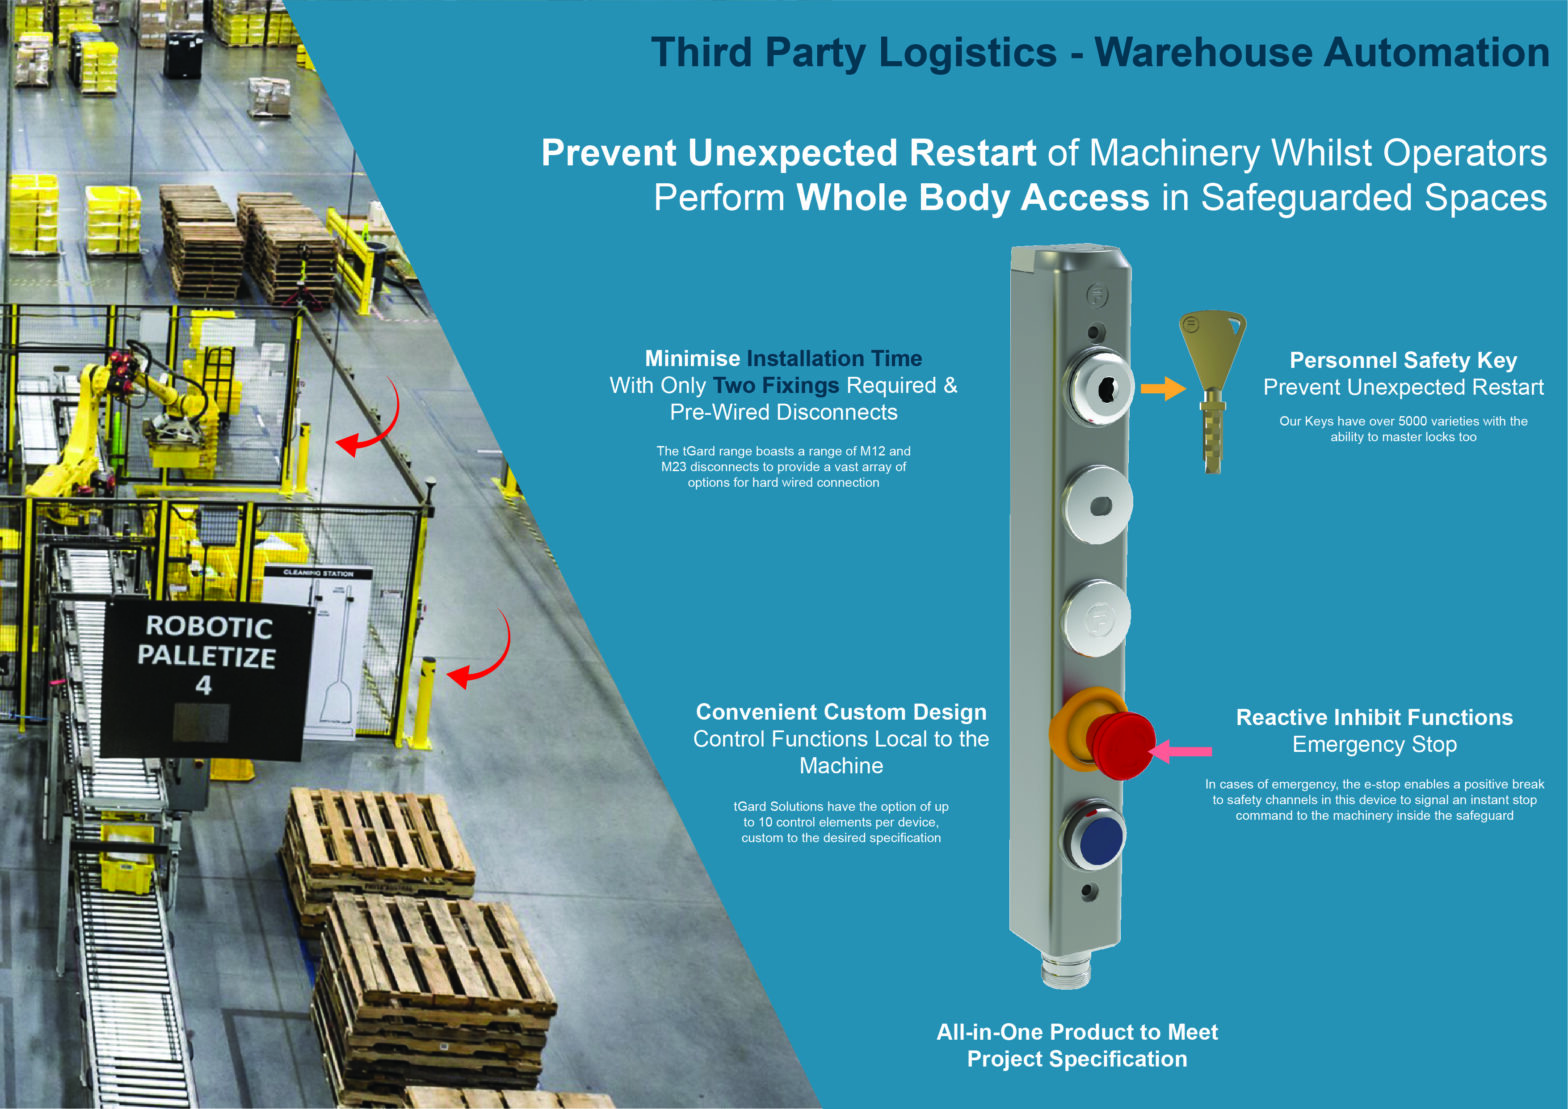 case study using a safety key to prevent unexpected start-up of a robotic palletiser